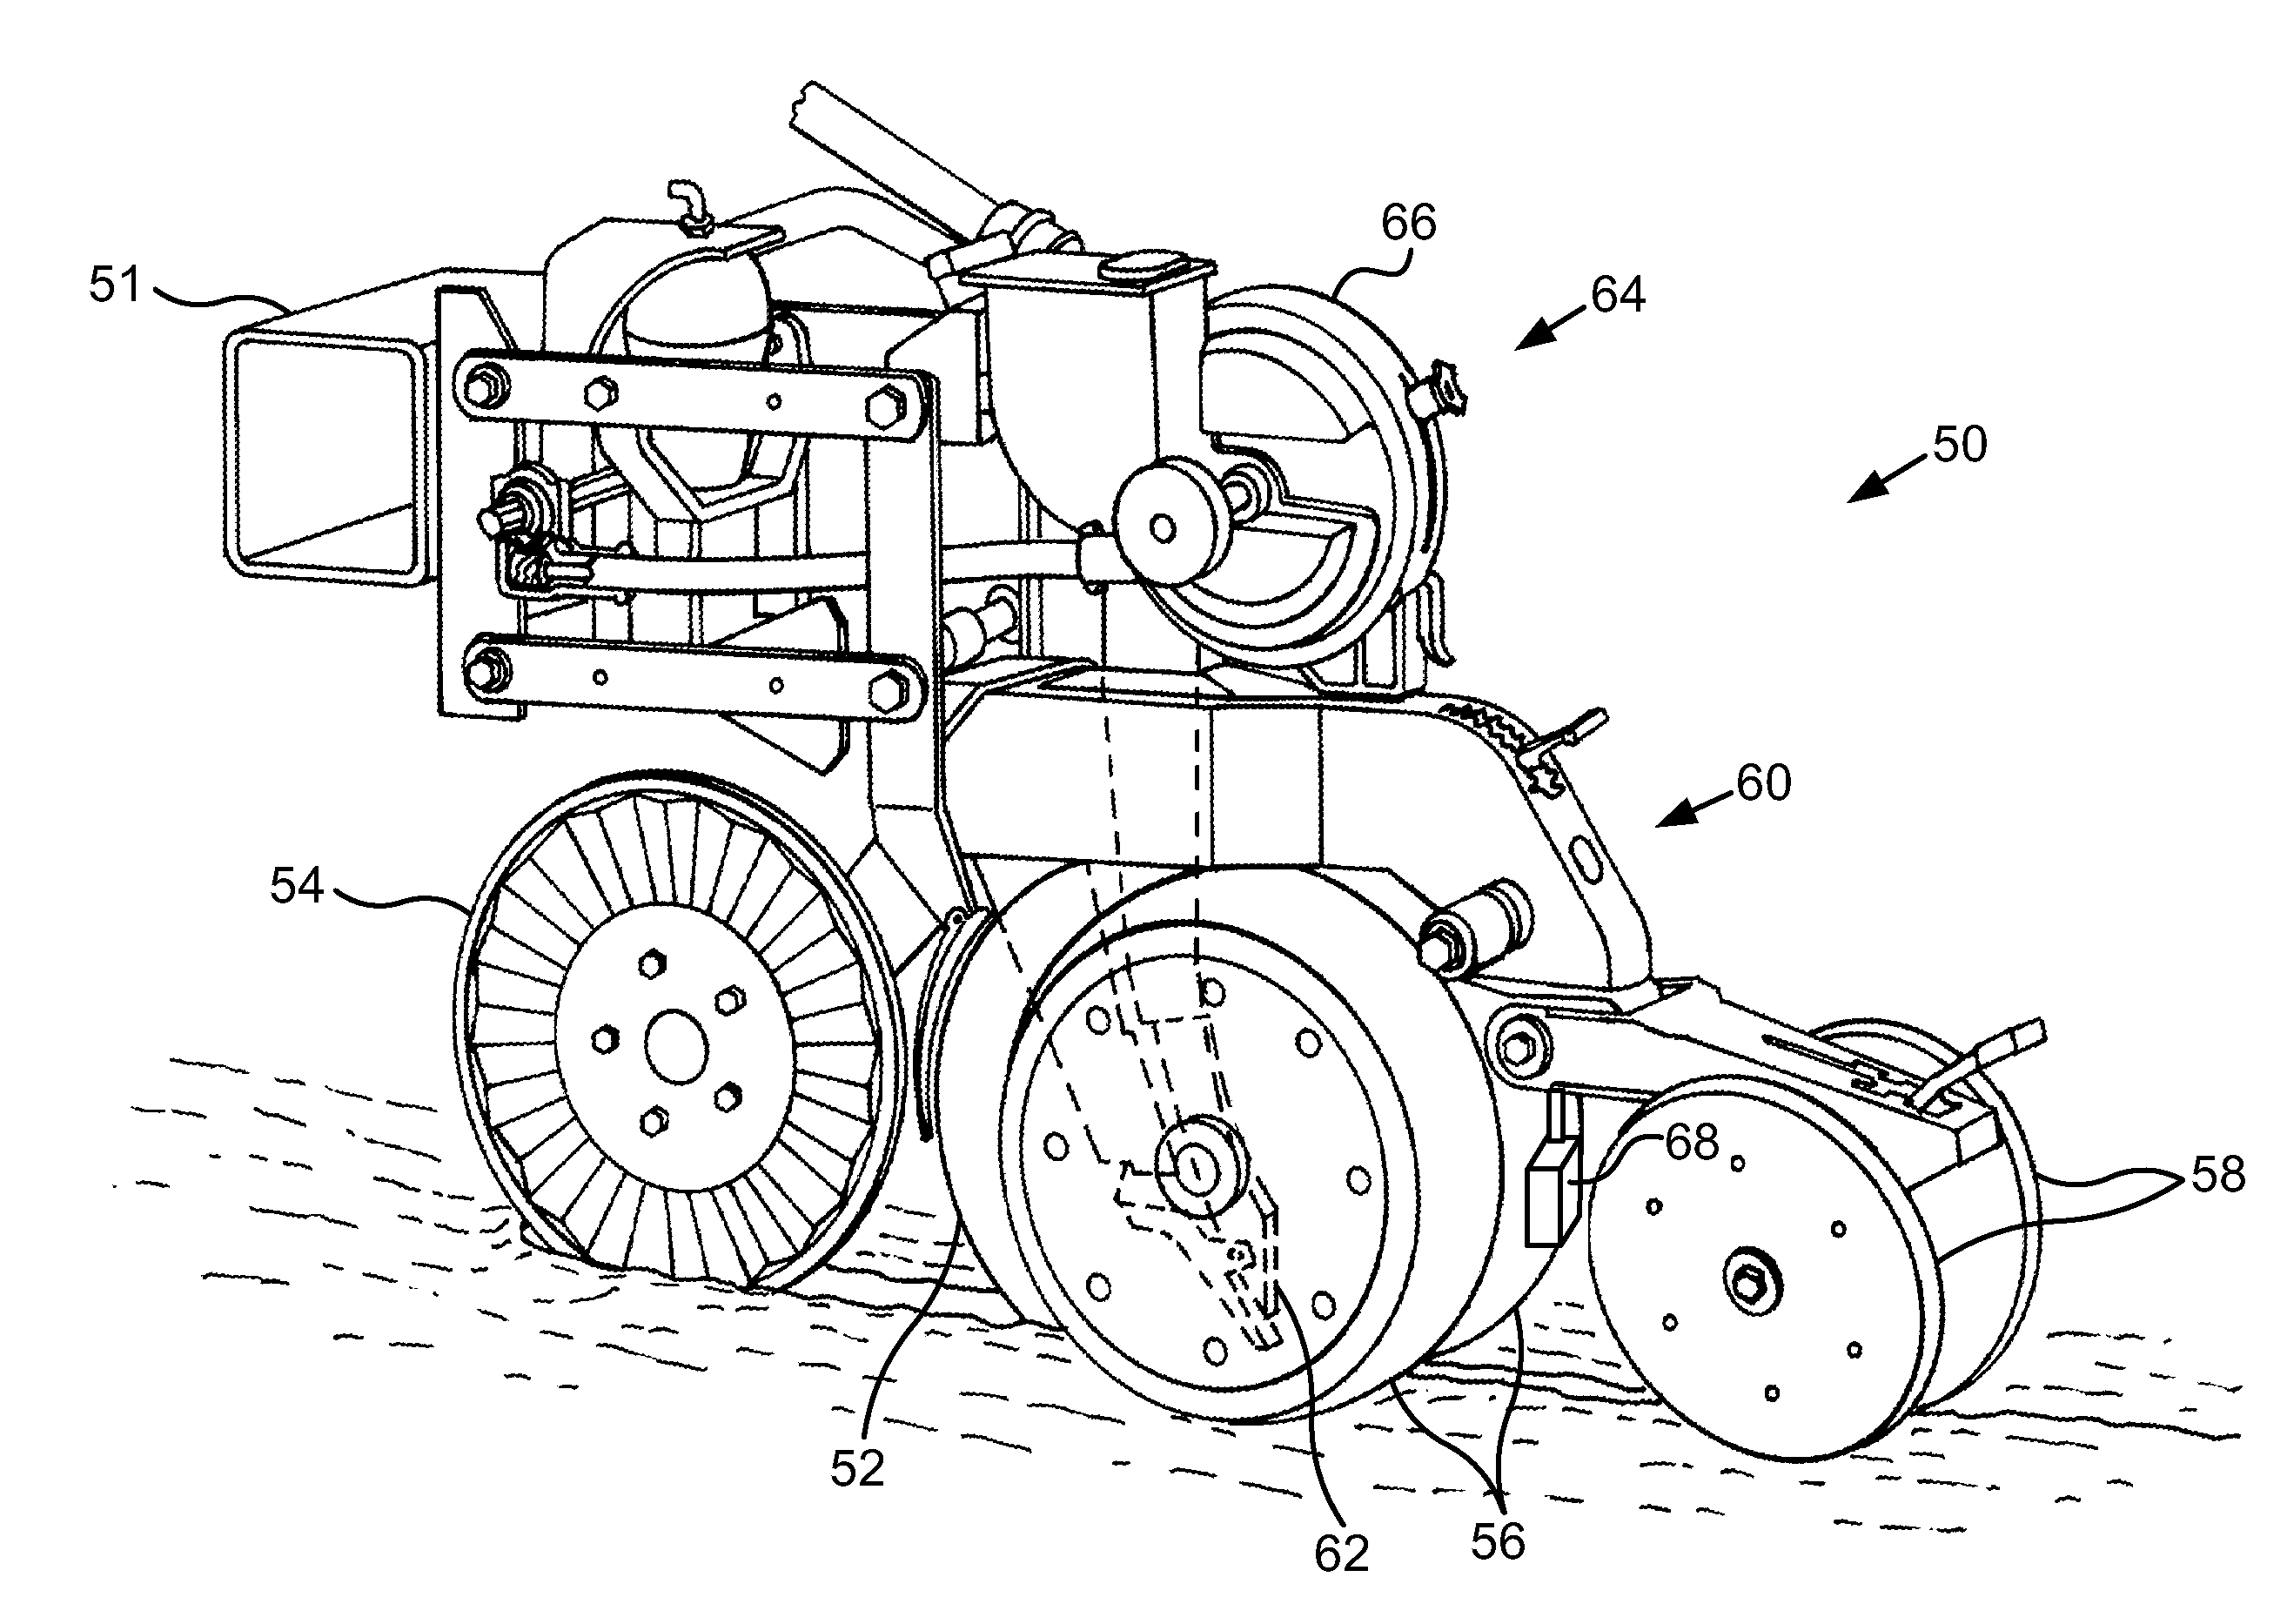 Seed spacing monitoring system for use in an agricultural seeder